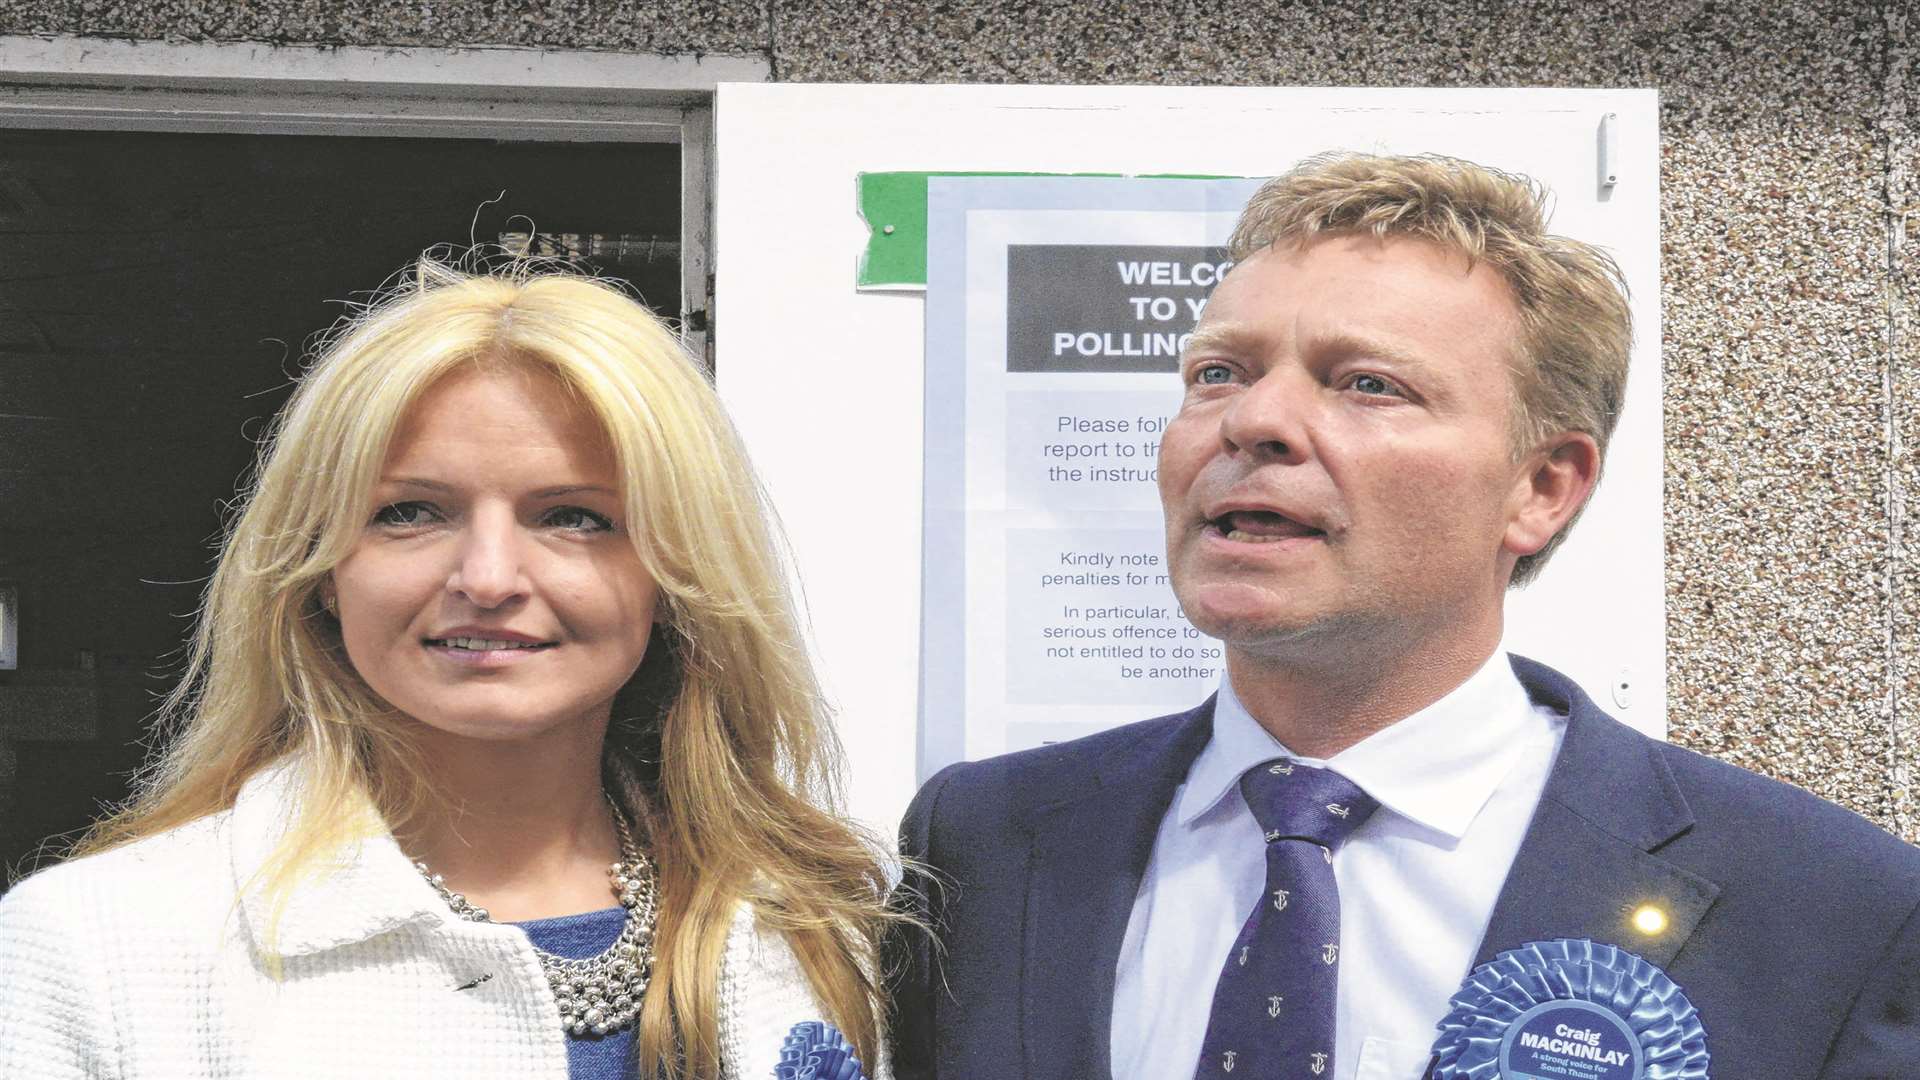 South Thanet MP Craig Mackinlay and his wife Kati arriving to cast their vote in the general election. The money the Tories spent on the campaign is under the spotlight